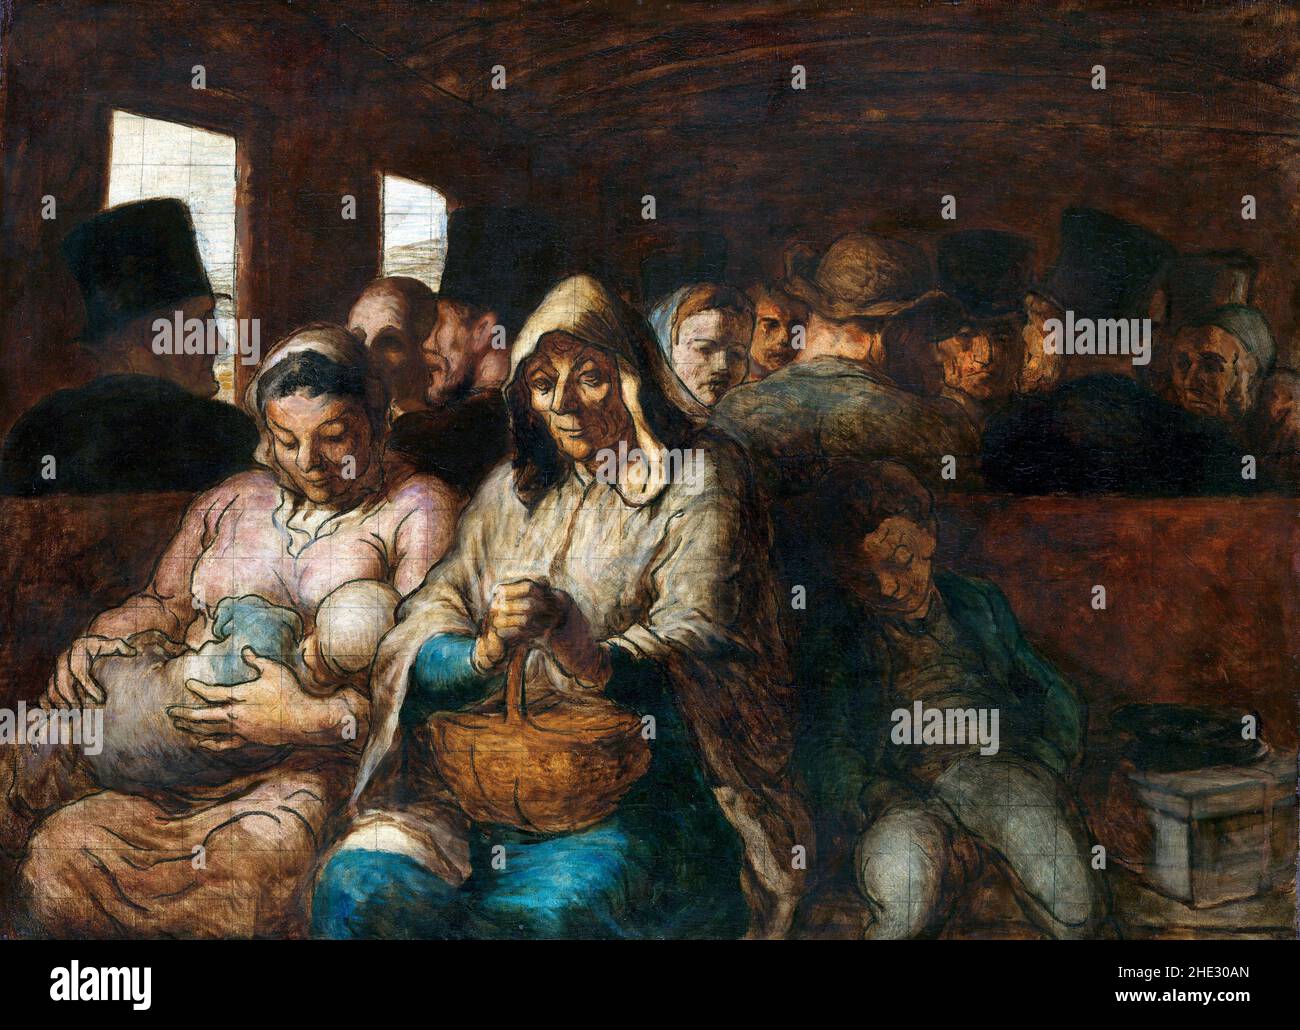 The Third Class Carriage by Honoré Daumier (1808-1879), oil on canvas, c. 1862/4 Stock Photo